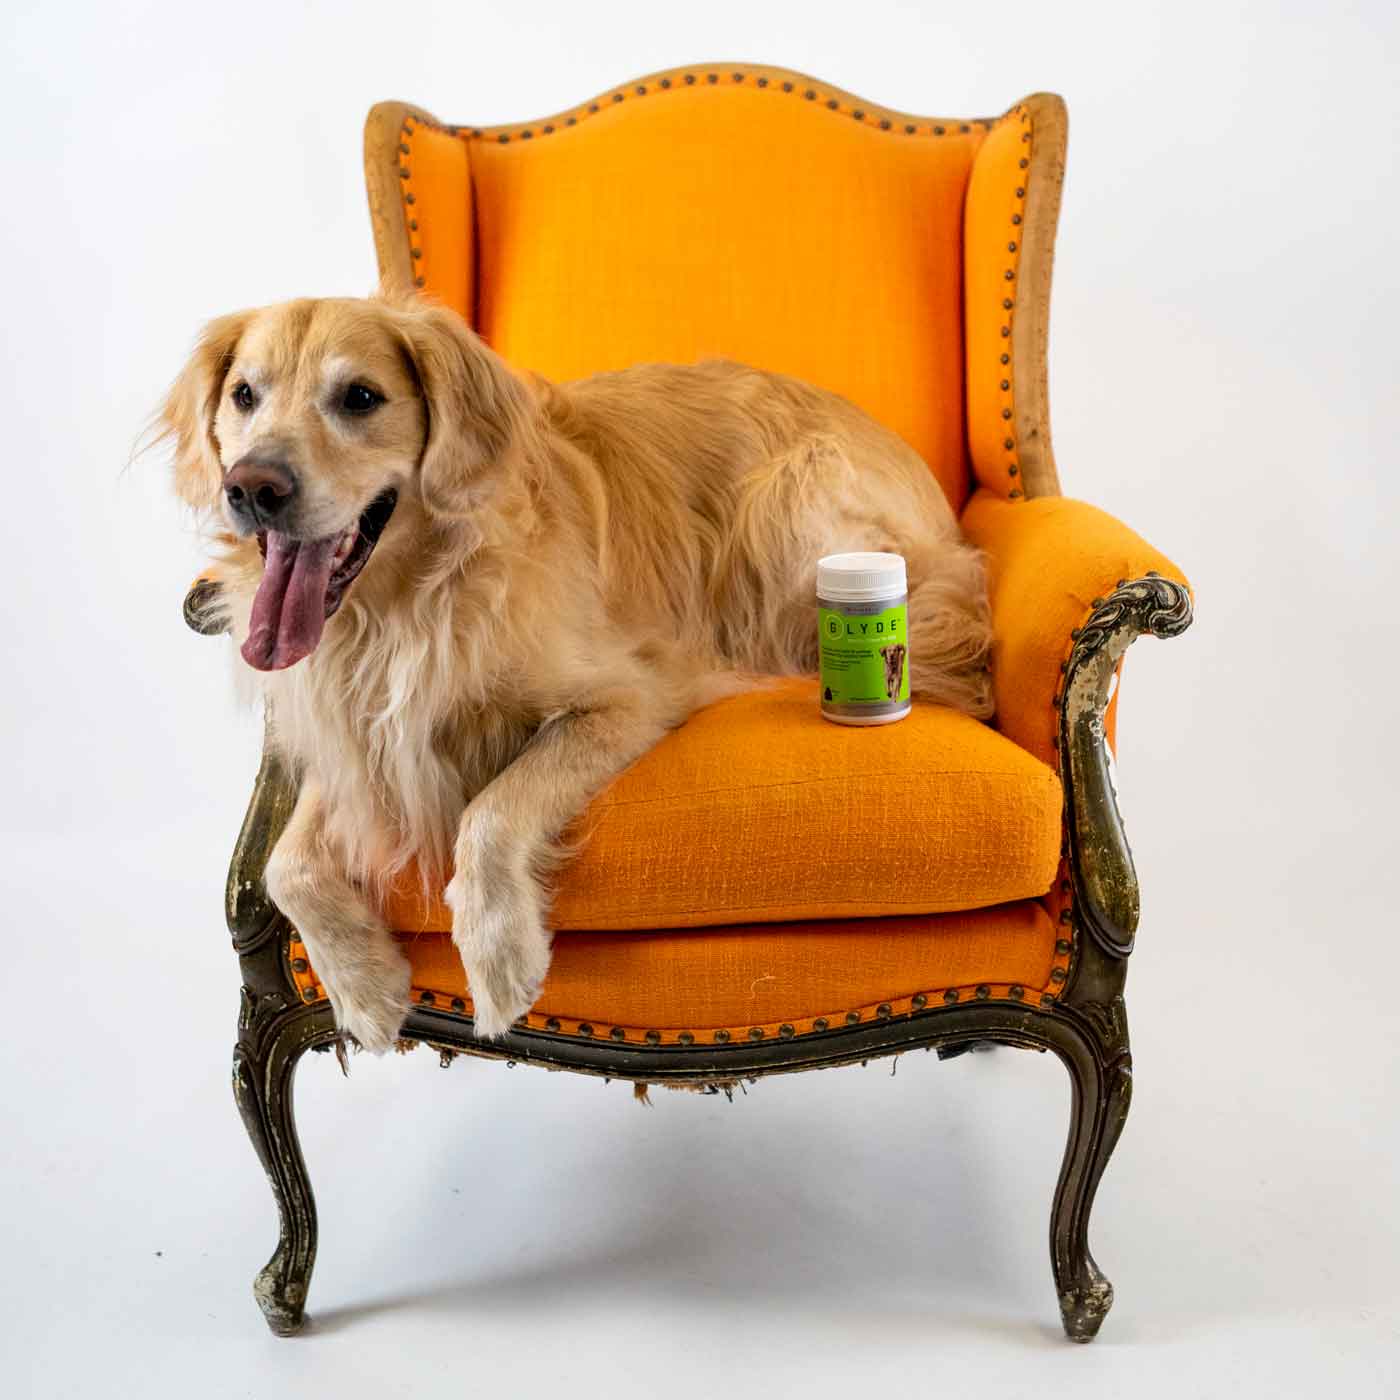 Golden retriever with Glyde Mobility Chews on chair